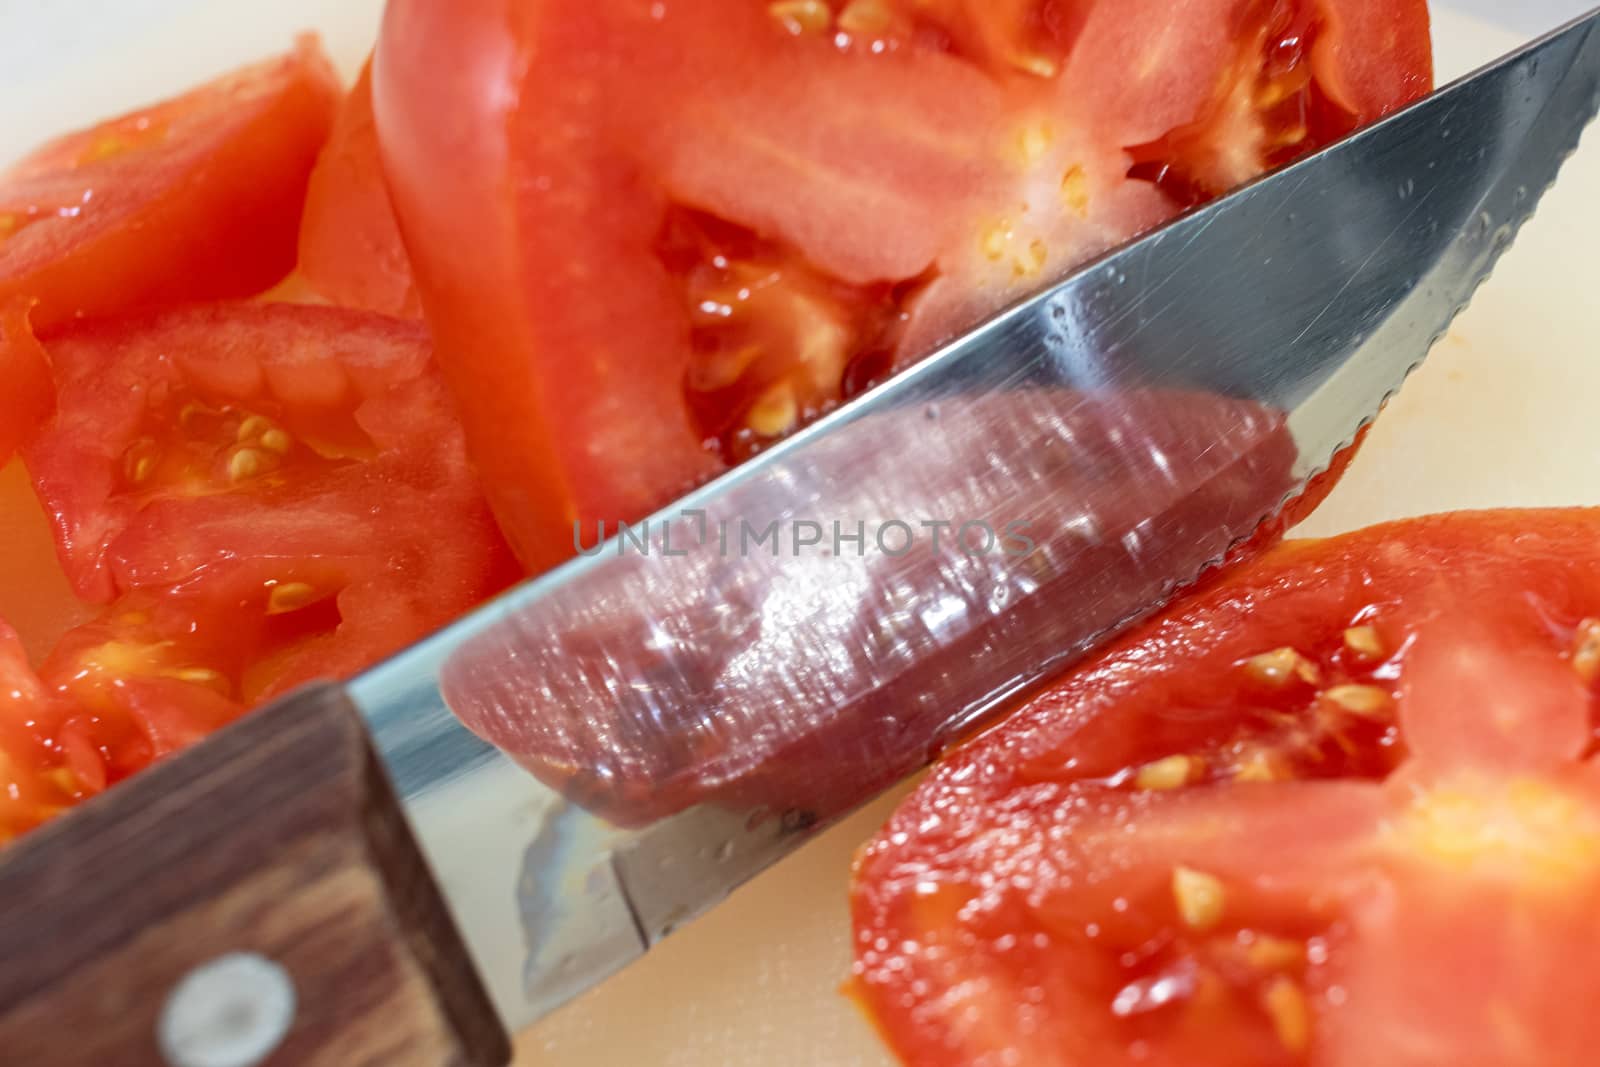 Close-up view of a steak knife with a wooden handle slicing through a red beefsteak tomato on a cutting board.